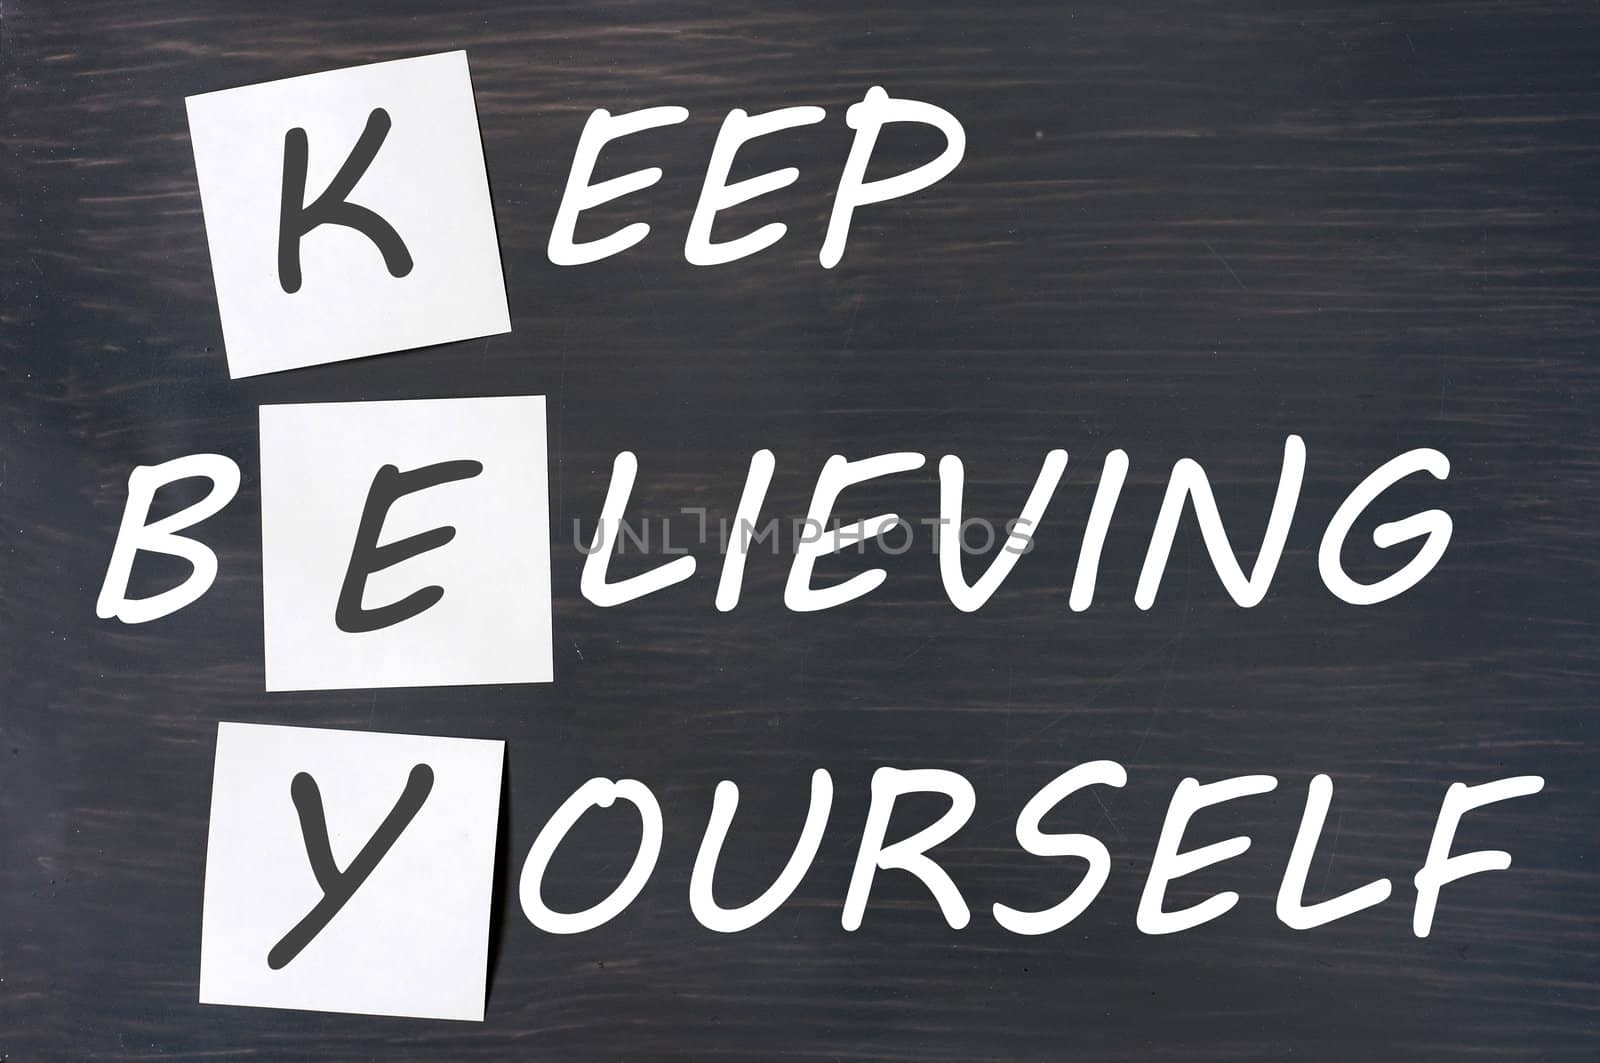 Acronym of KEY for Keep Believing Yourself written in chalk on a smudged wooden blackboard